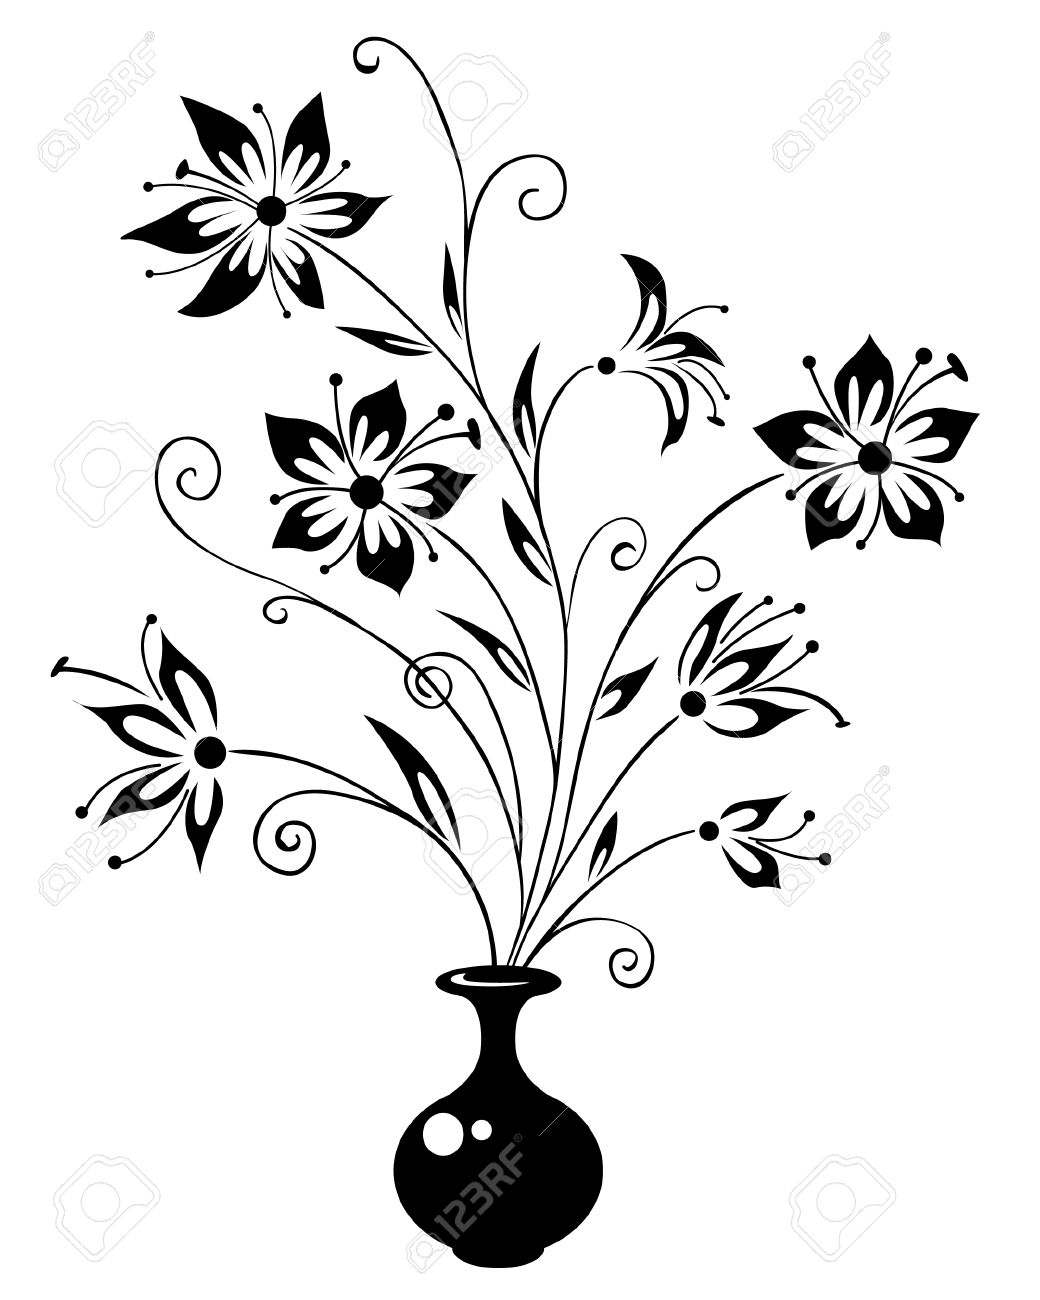 A Beautiful Flower Pot Drawing : How to draw flowers with vase